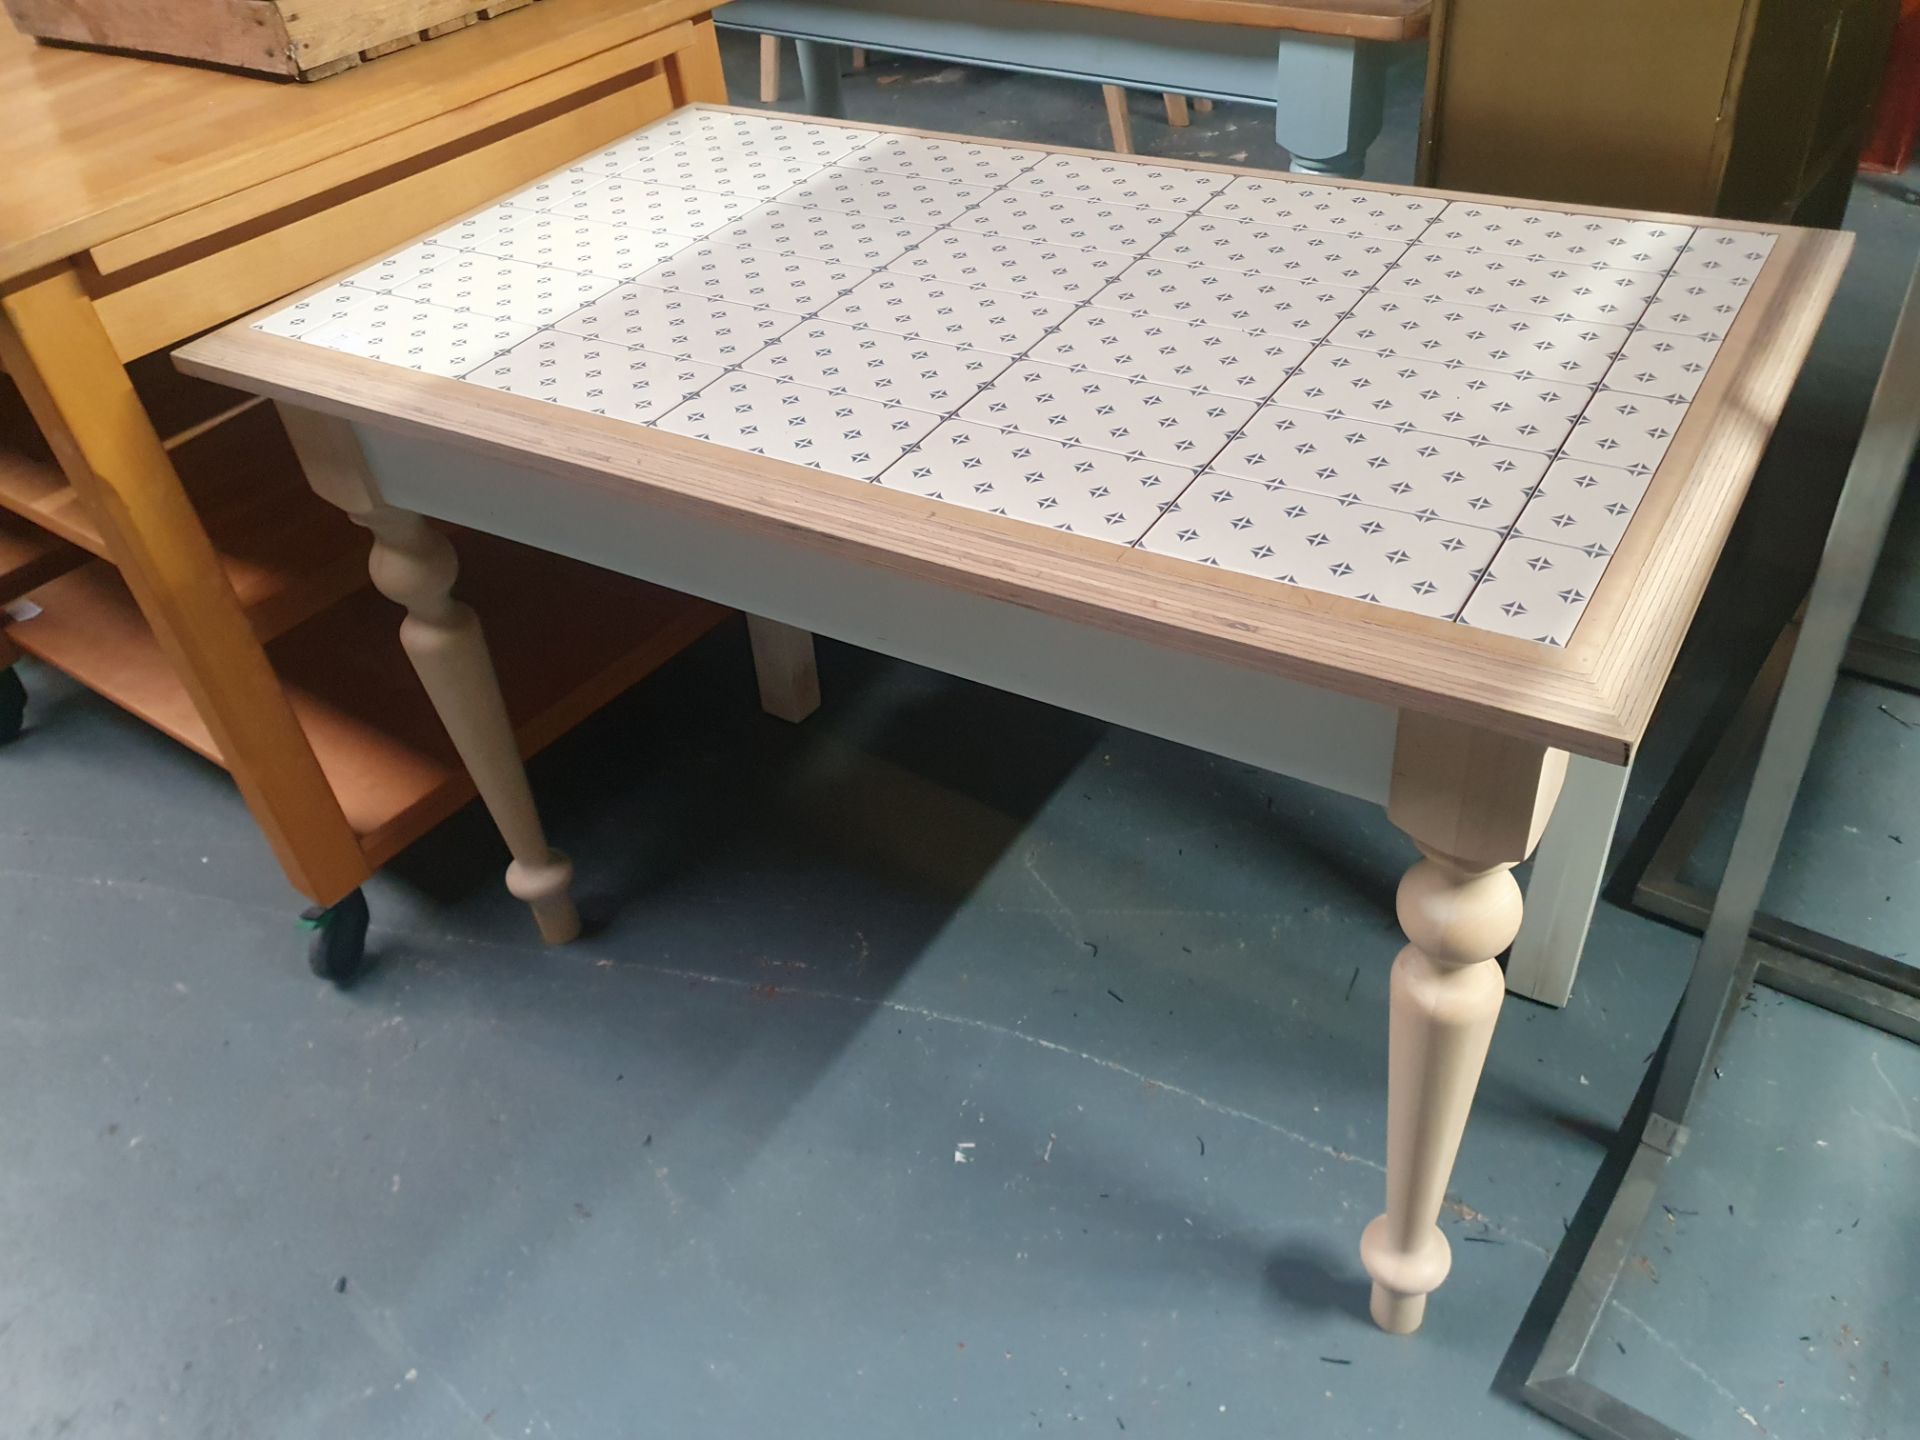 Tile Topped Table - Image 2 of 2